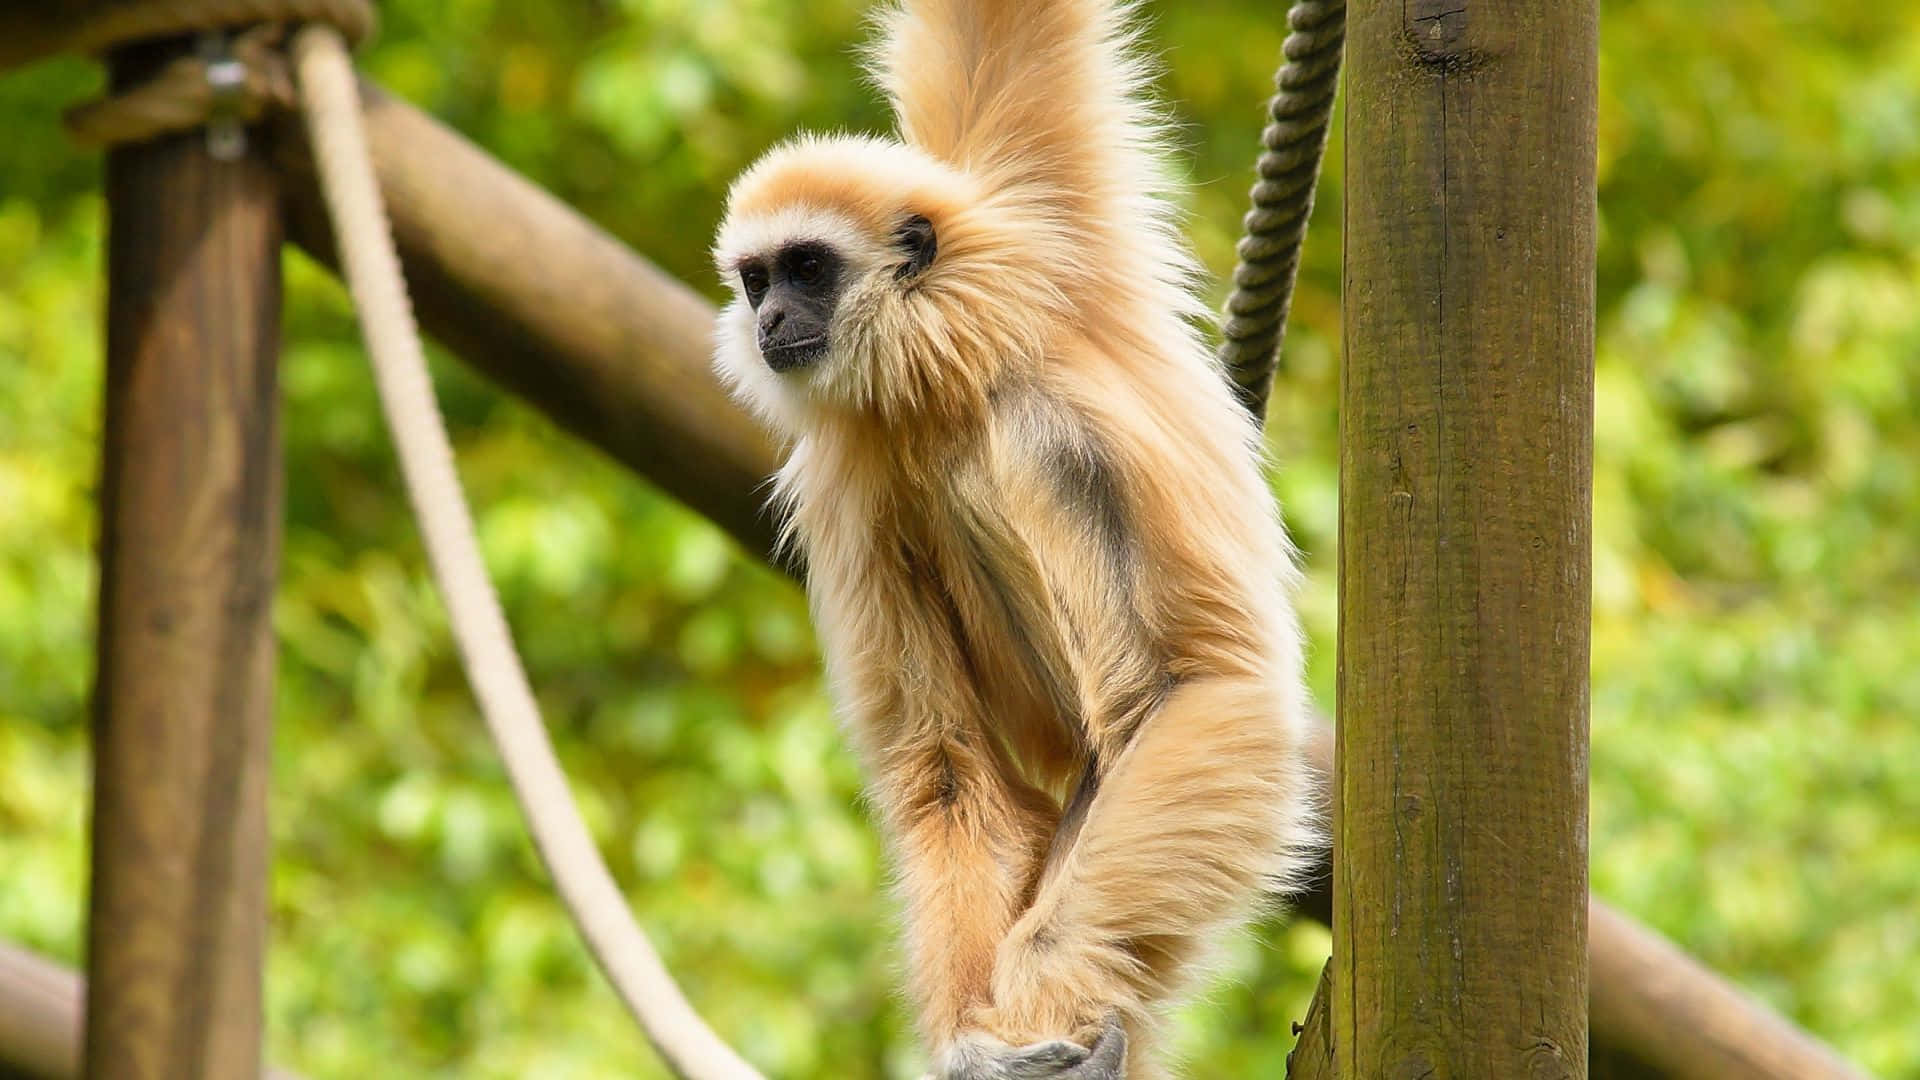 A 1080p close-up shot of a Gibbon swinging in a tree